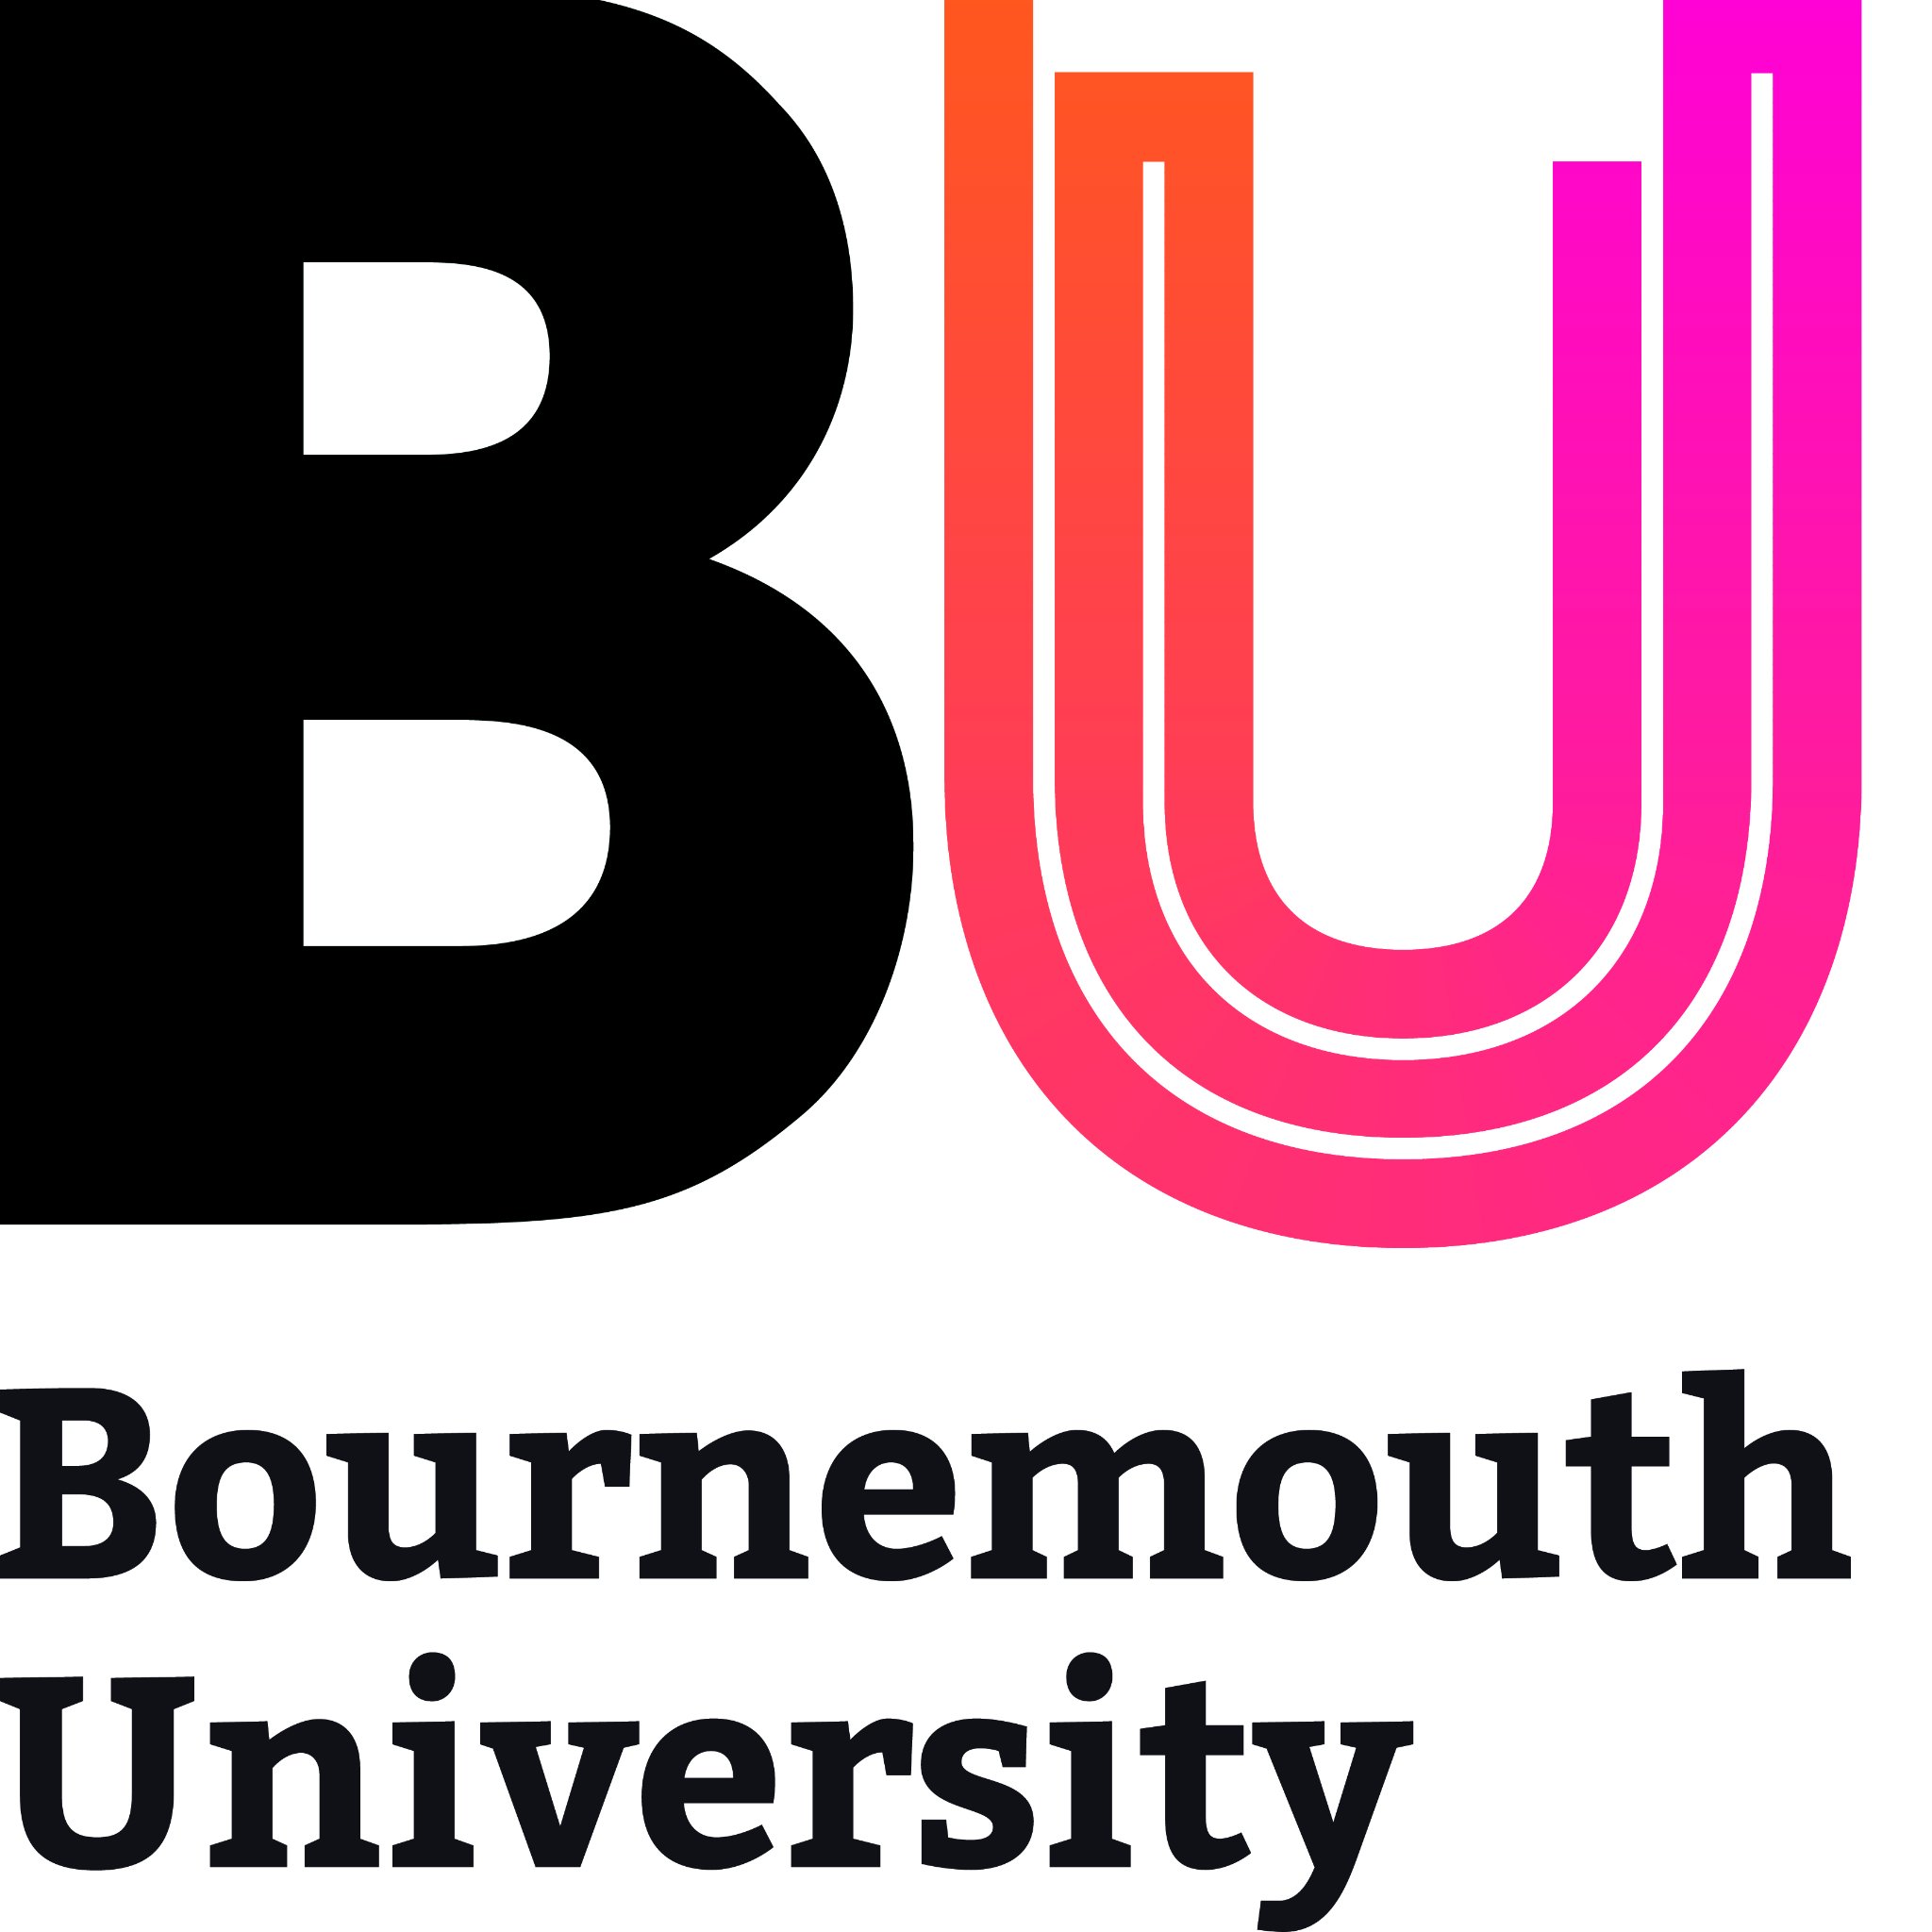 This is the official twitter account for Bournemouth University Disaster Management Centre.